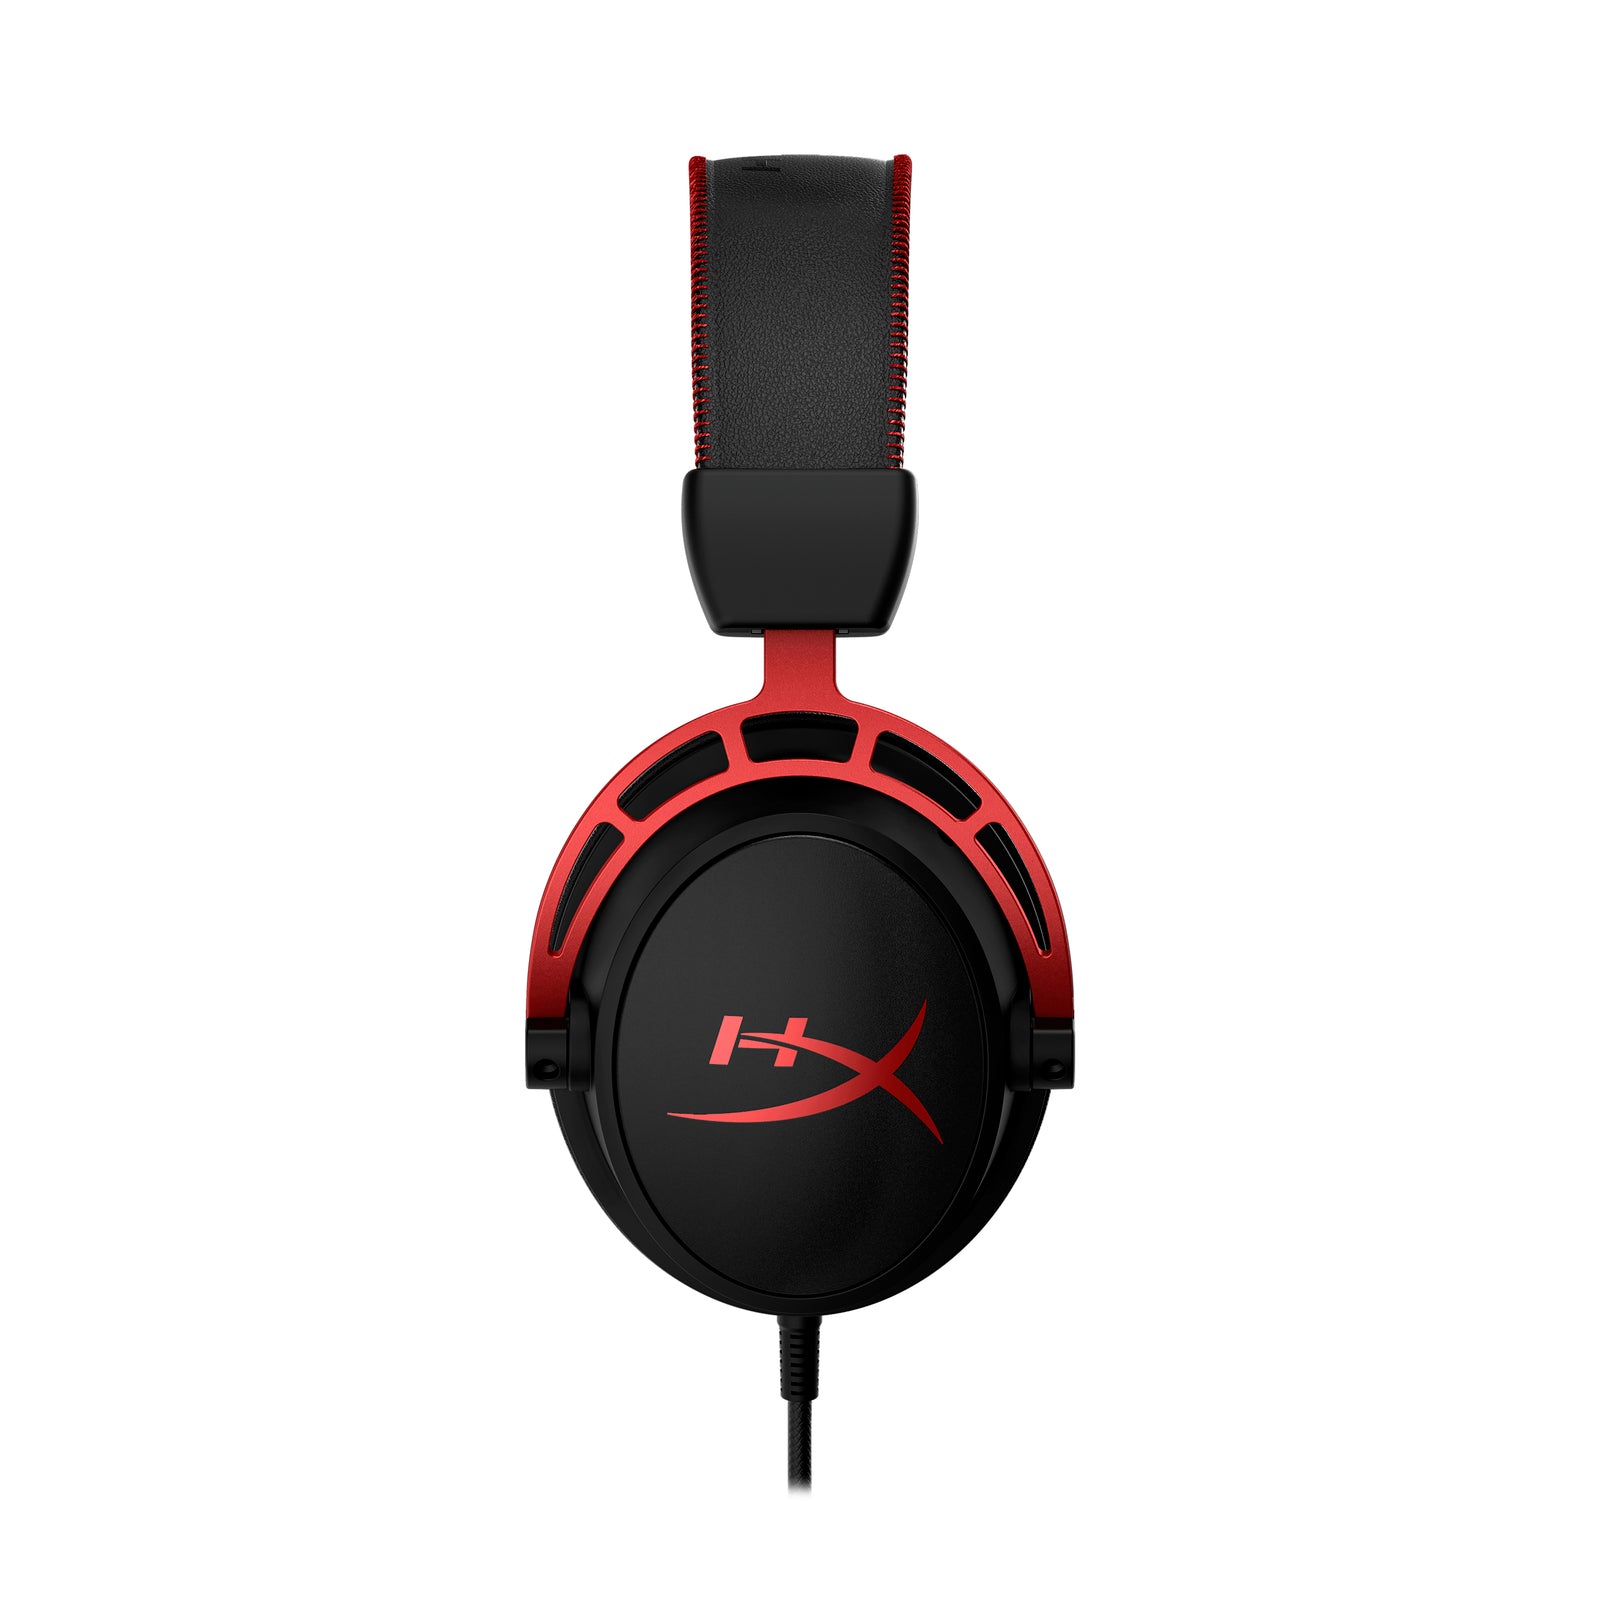  HyperX Cloud Alpha – Gaming Headset, for PC, PS4, Xbox